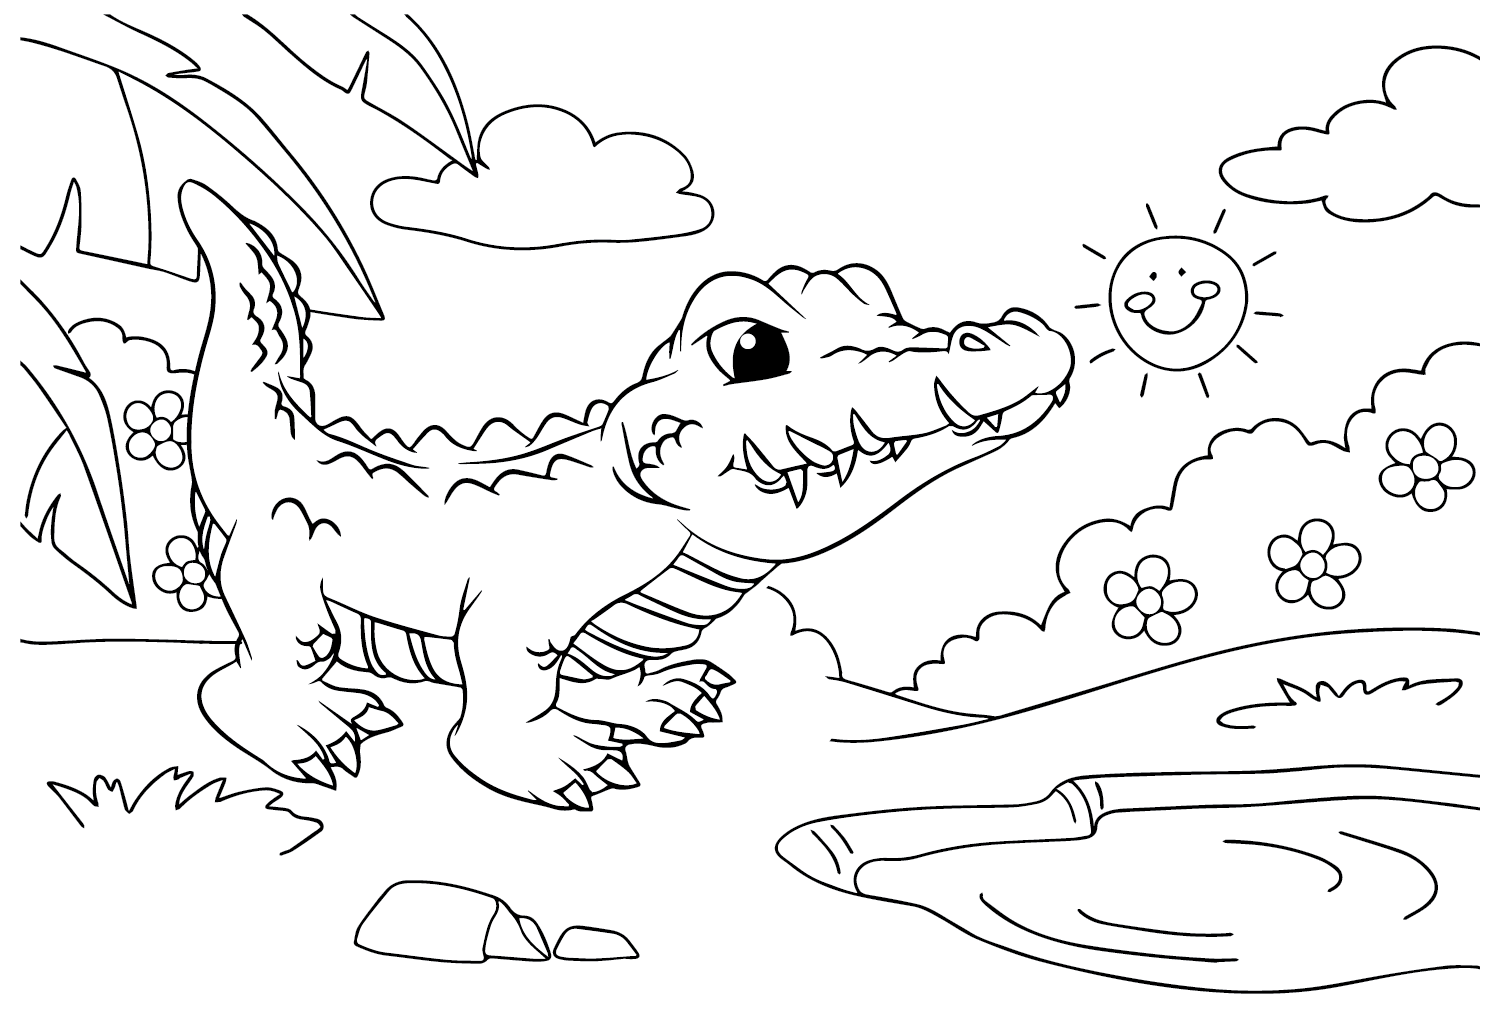 Crocodile Coloring Page PNG from Crocodile